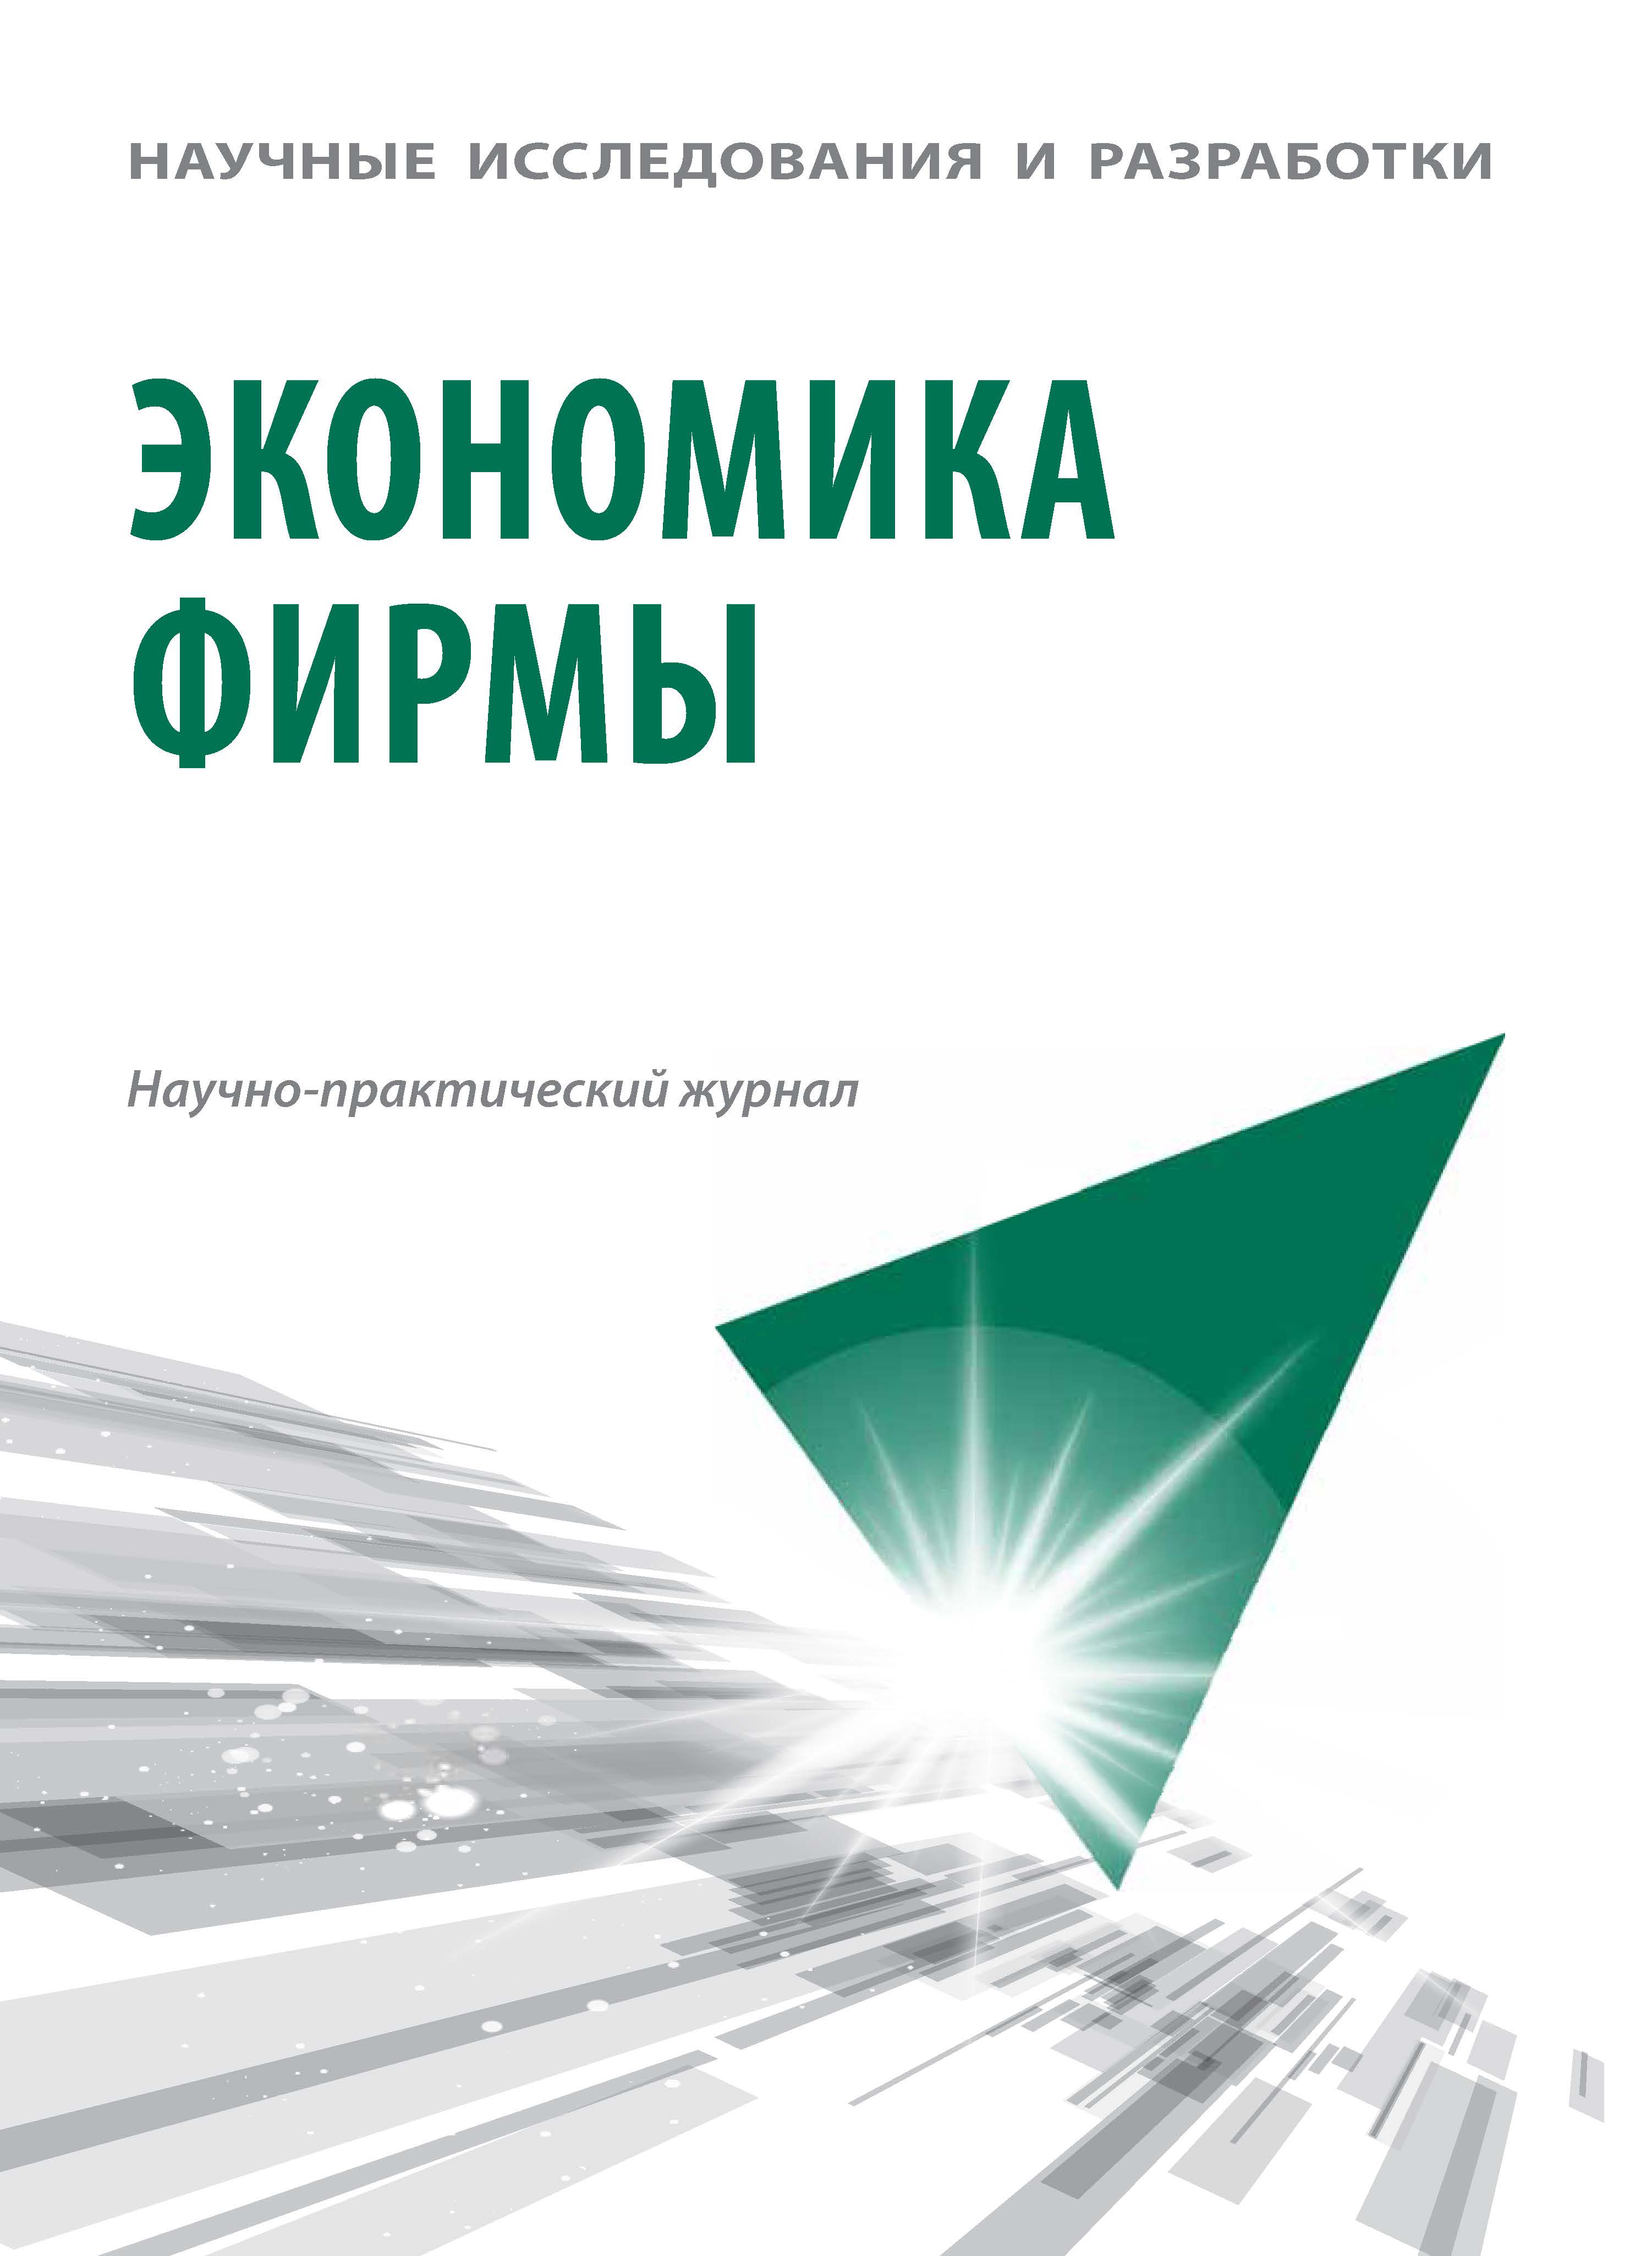                         Supra-Industry Technologies in the Mechanism of Financing of Cultural Industries in Russia
            